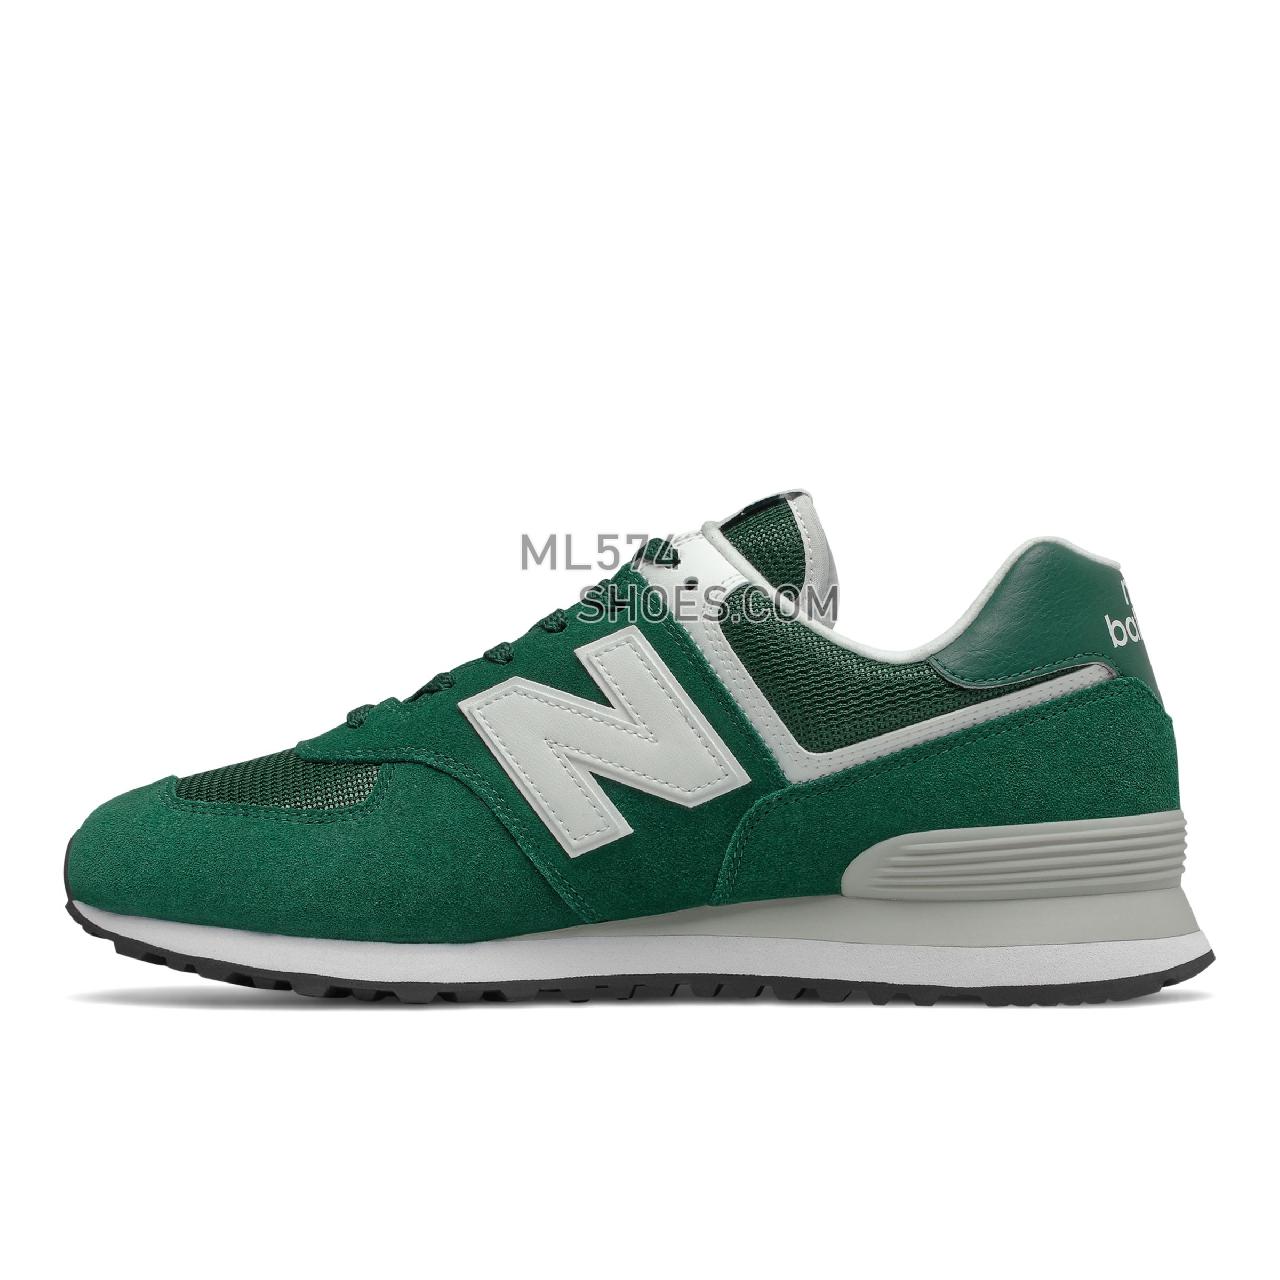 New Balance 574v2 - Unisex Men's Women's Classic Sneakers - Nightwatch Green with White - ML574RO2